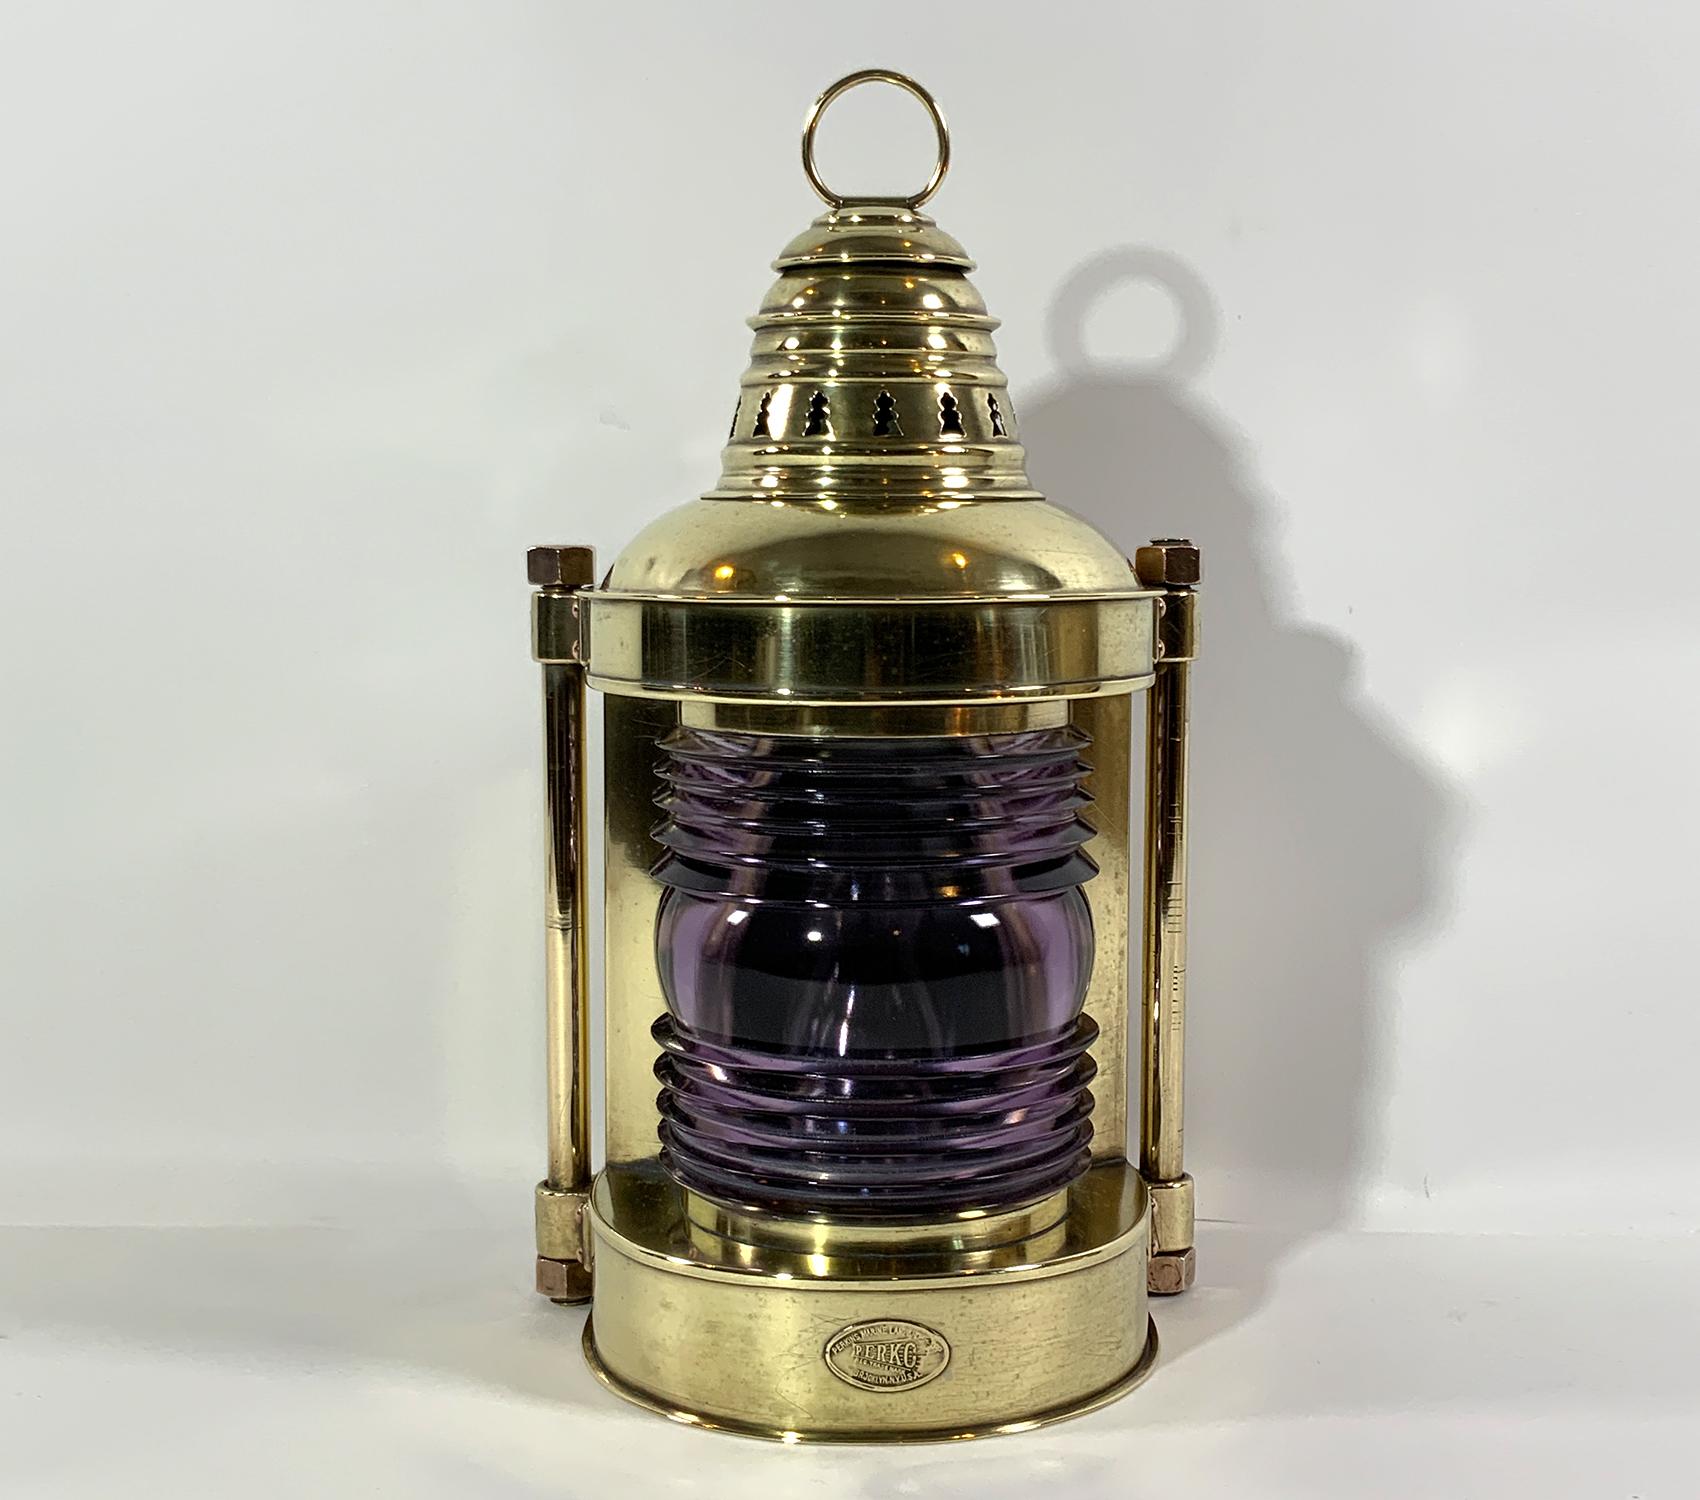 Heavy brass masthead lantern with makers badge tag from Perkins Marine of Brooklyn, New York, Perko. The Fresnel glass lens has turned to a shade of light lavender. Heavy brass bars are fitted to the side mount rings. Vented top with carry ring.